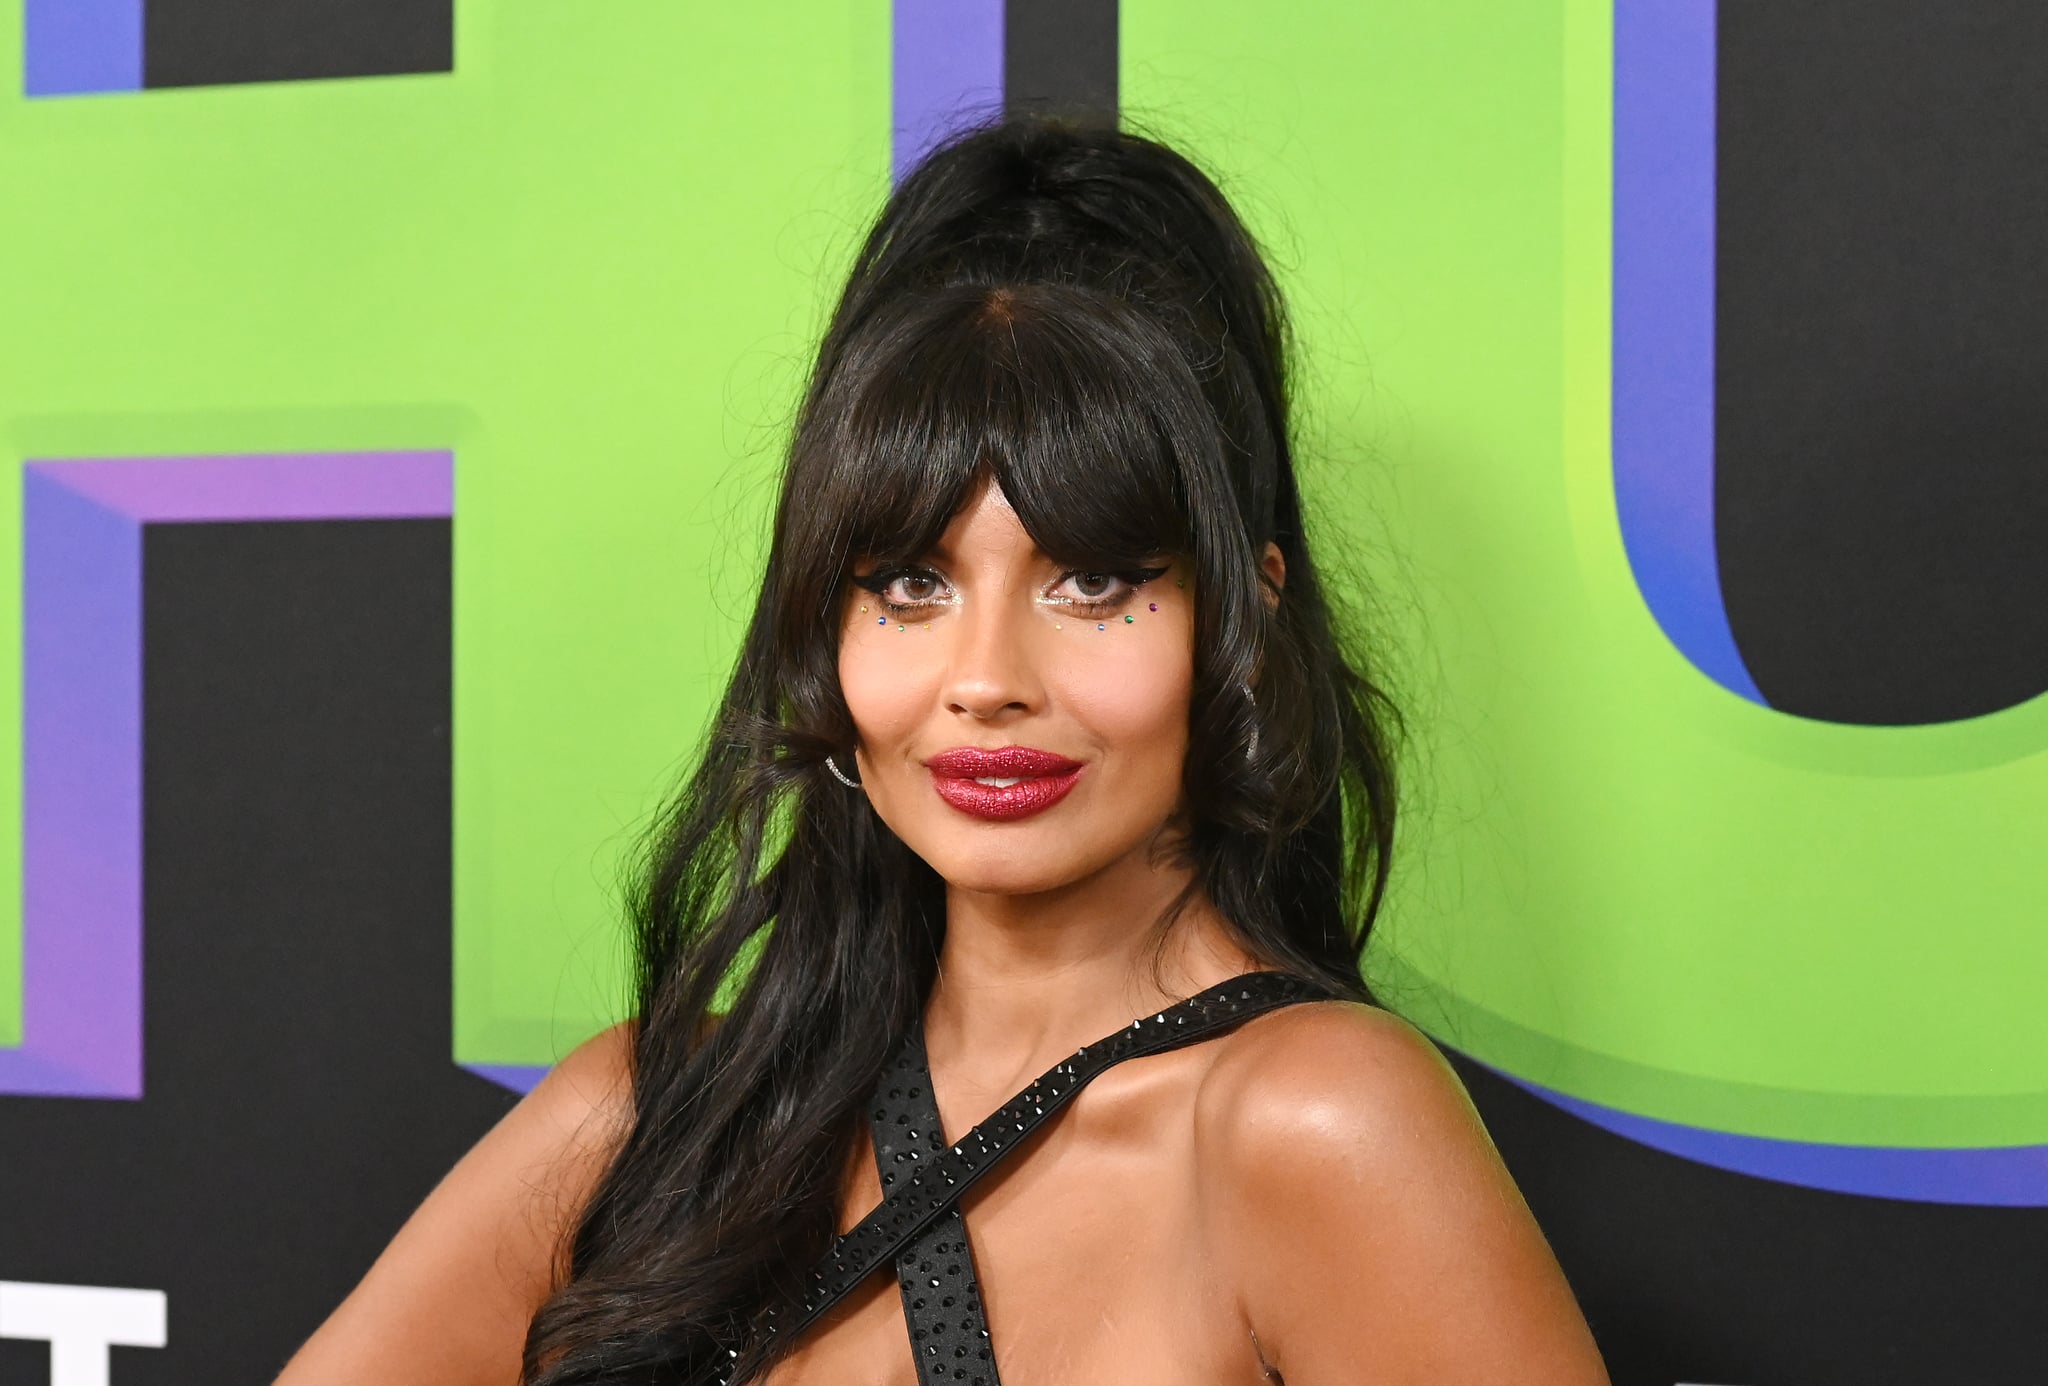 Jameela Jamil Reveals Why She Dropped Out of "You" season four audition